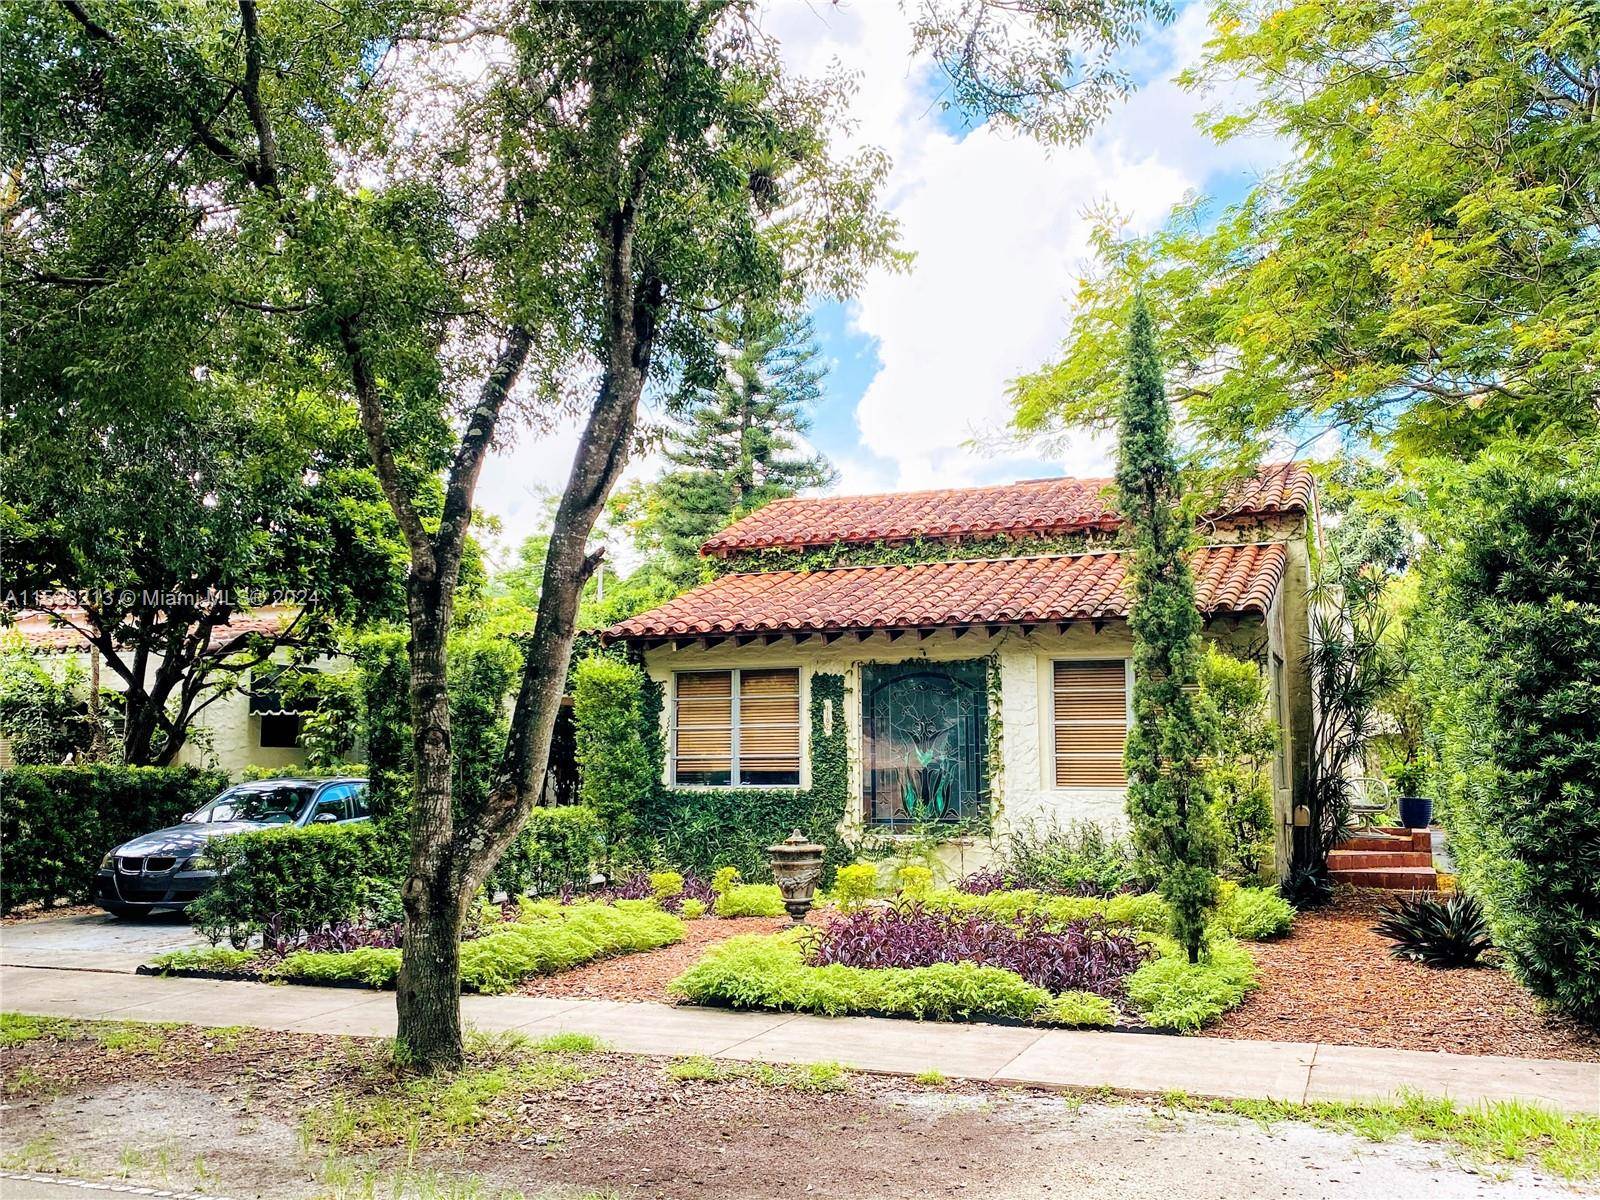 Charming 1925 Spanish style home in Coral Gables now available !